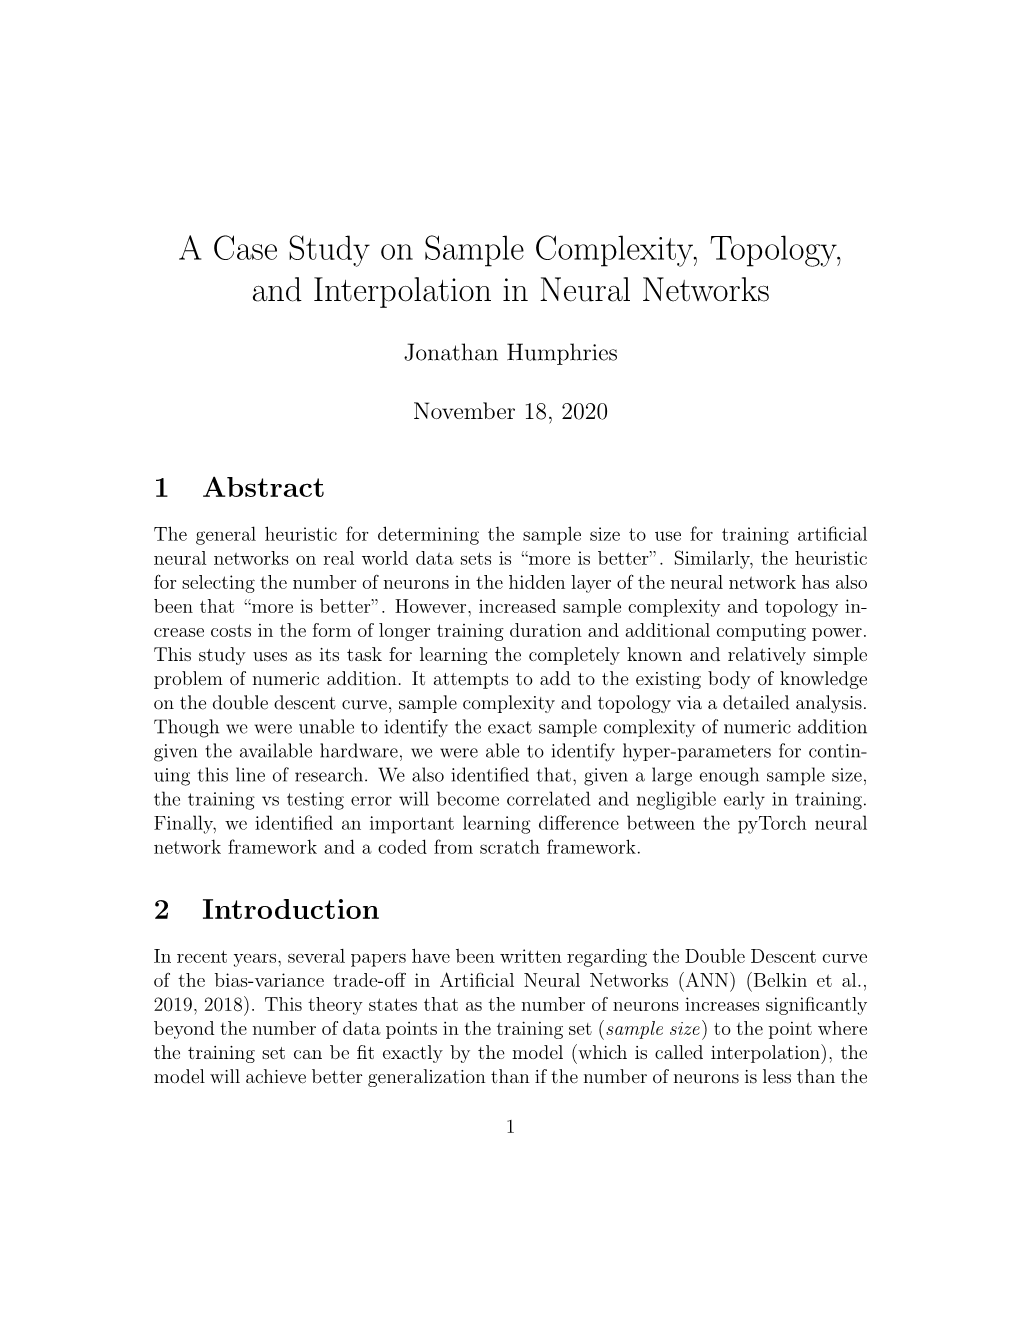 A Case Study on Sample Complexity, Topology, and Interpolation in Neural Networks